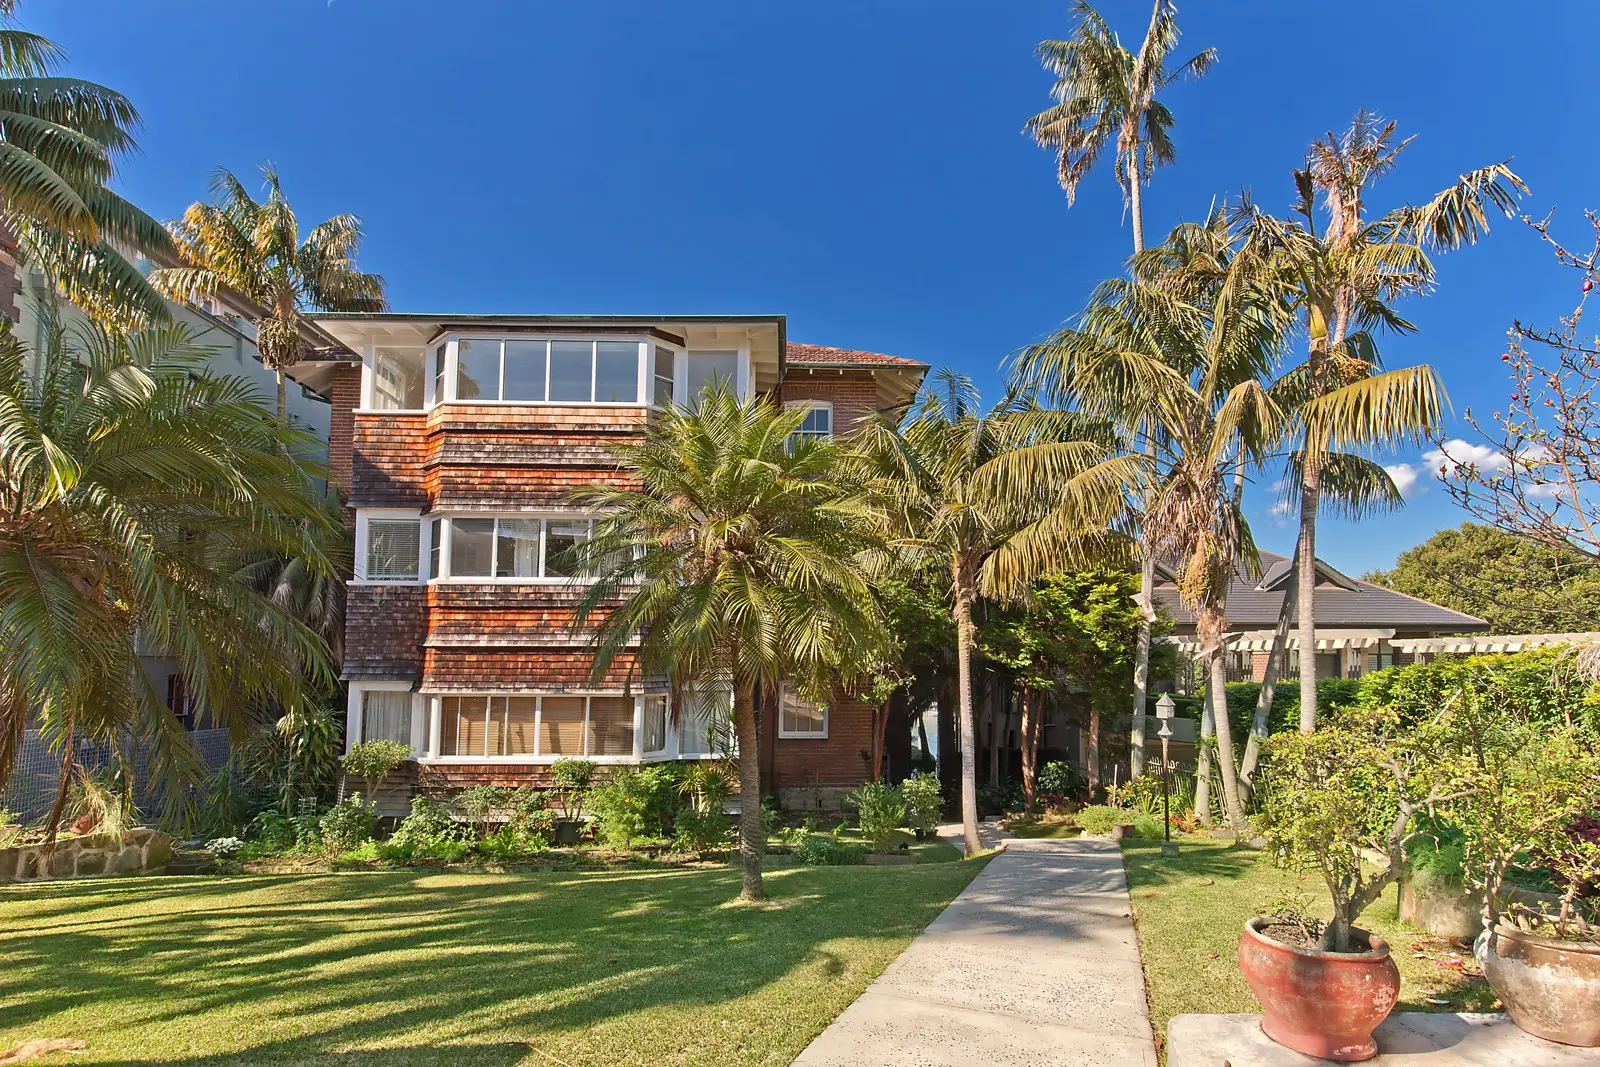 Photo #1: 6/9 Shellcove Road, Neutral Bay - Sold by Sydney Sotheby's International Realty